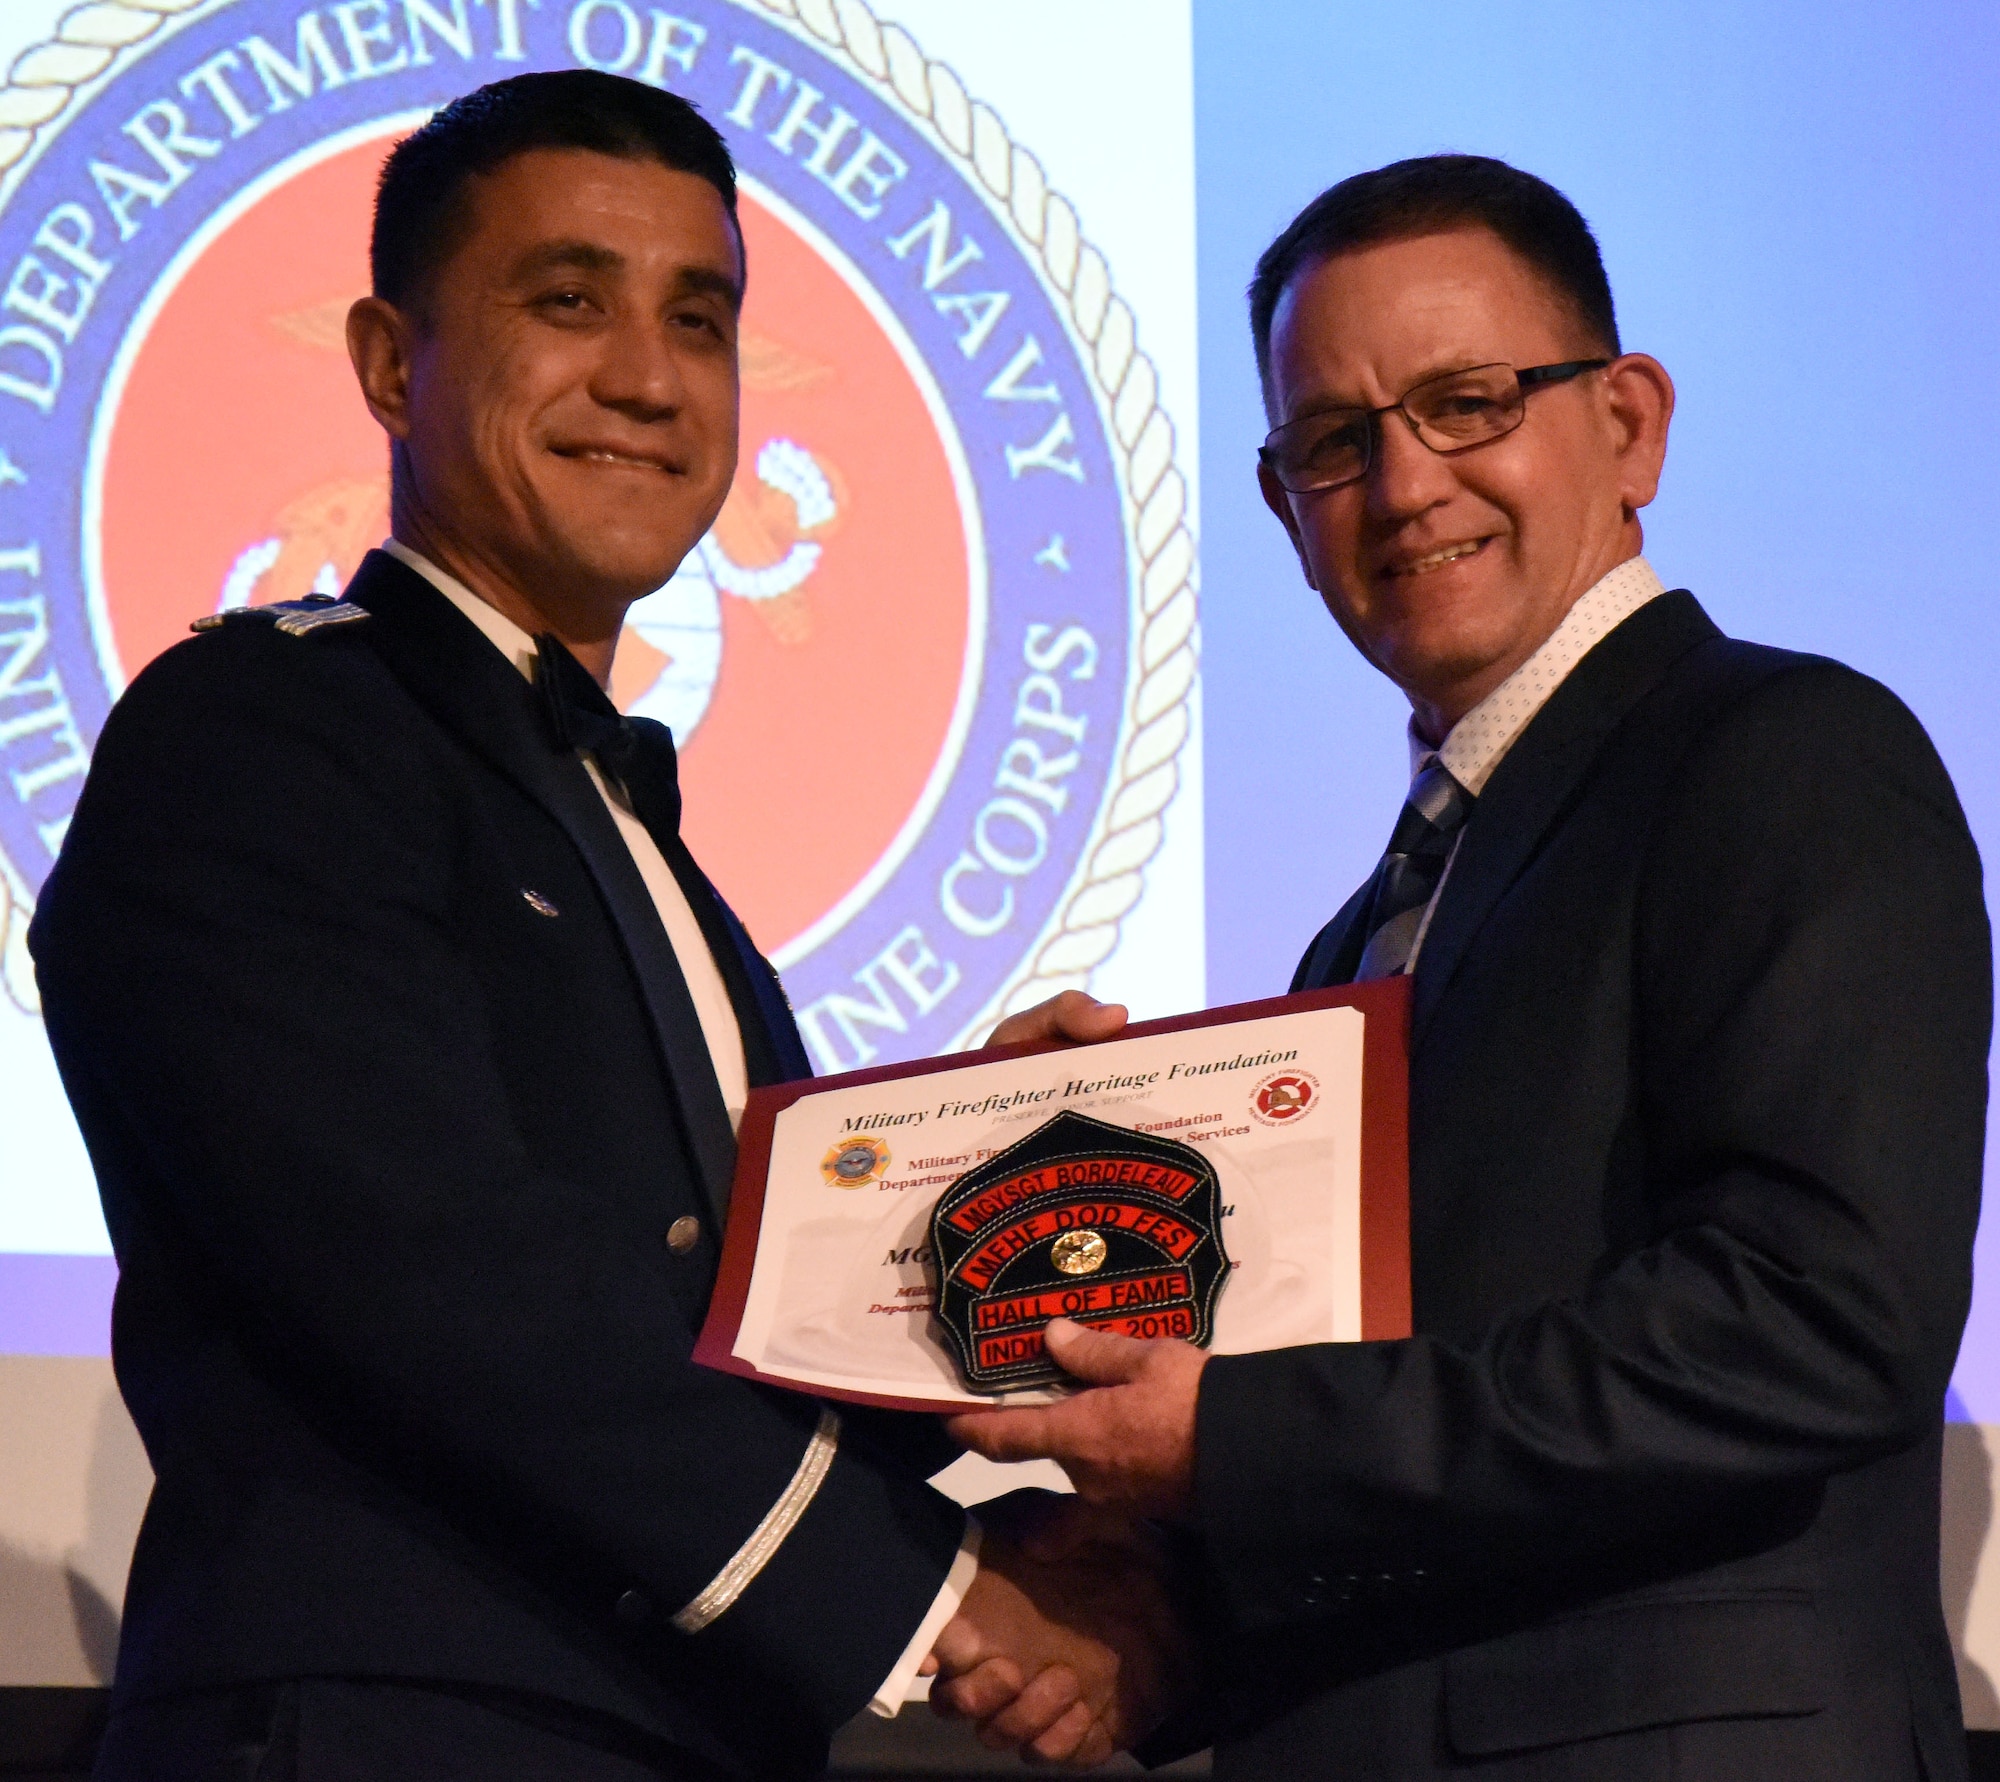 U.S. Air Force Col. Ricky Mills, 17th Training Wing commander, presents retired U.S. Marine Corps Master Gunnery Sgt. Peter Bordeleau, firefighter Hall of Fame inductee, with a new clip to his helmet as congratulations during the 16th Annual Firefighter Ball at the McNease Convention Center, San Angelo, Texas, April 28, 2018. Bordeleau served in the U.S. Marine Corps from 1983-2013, during which he was stationed at Goodfellow on two separate occasions. (U.S. Air Force photo by Airman 1st Class Seraiah Hines/Released)